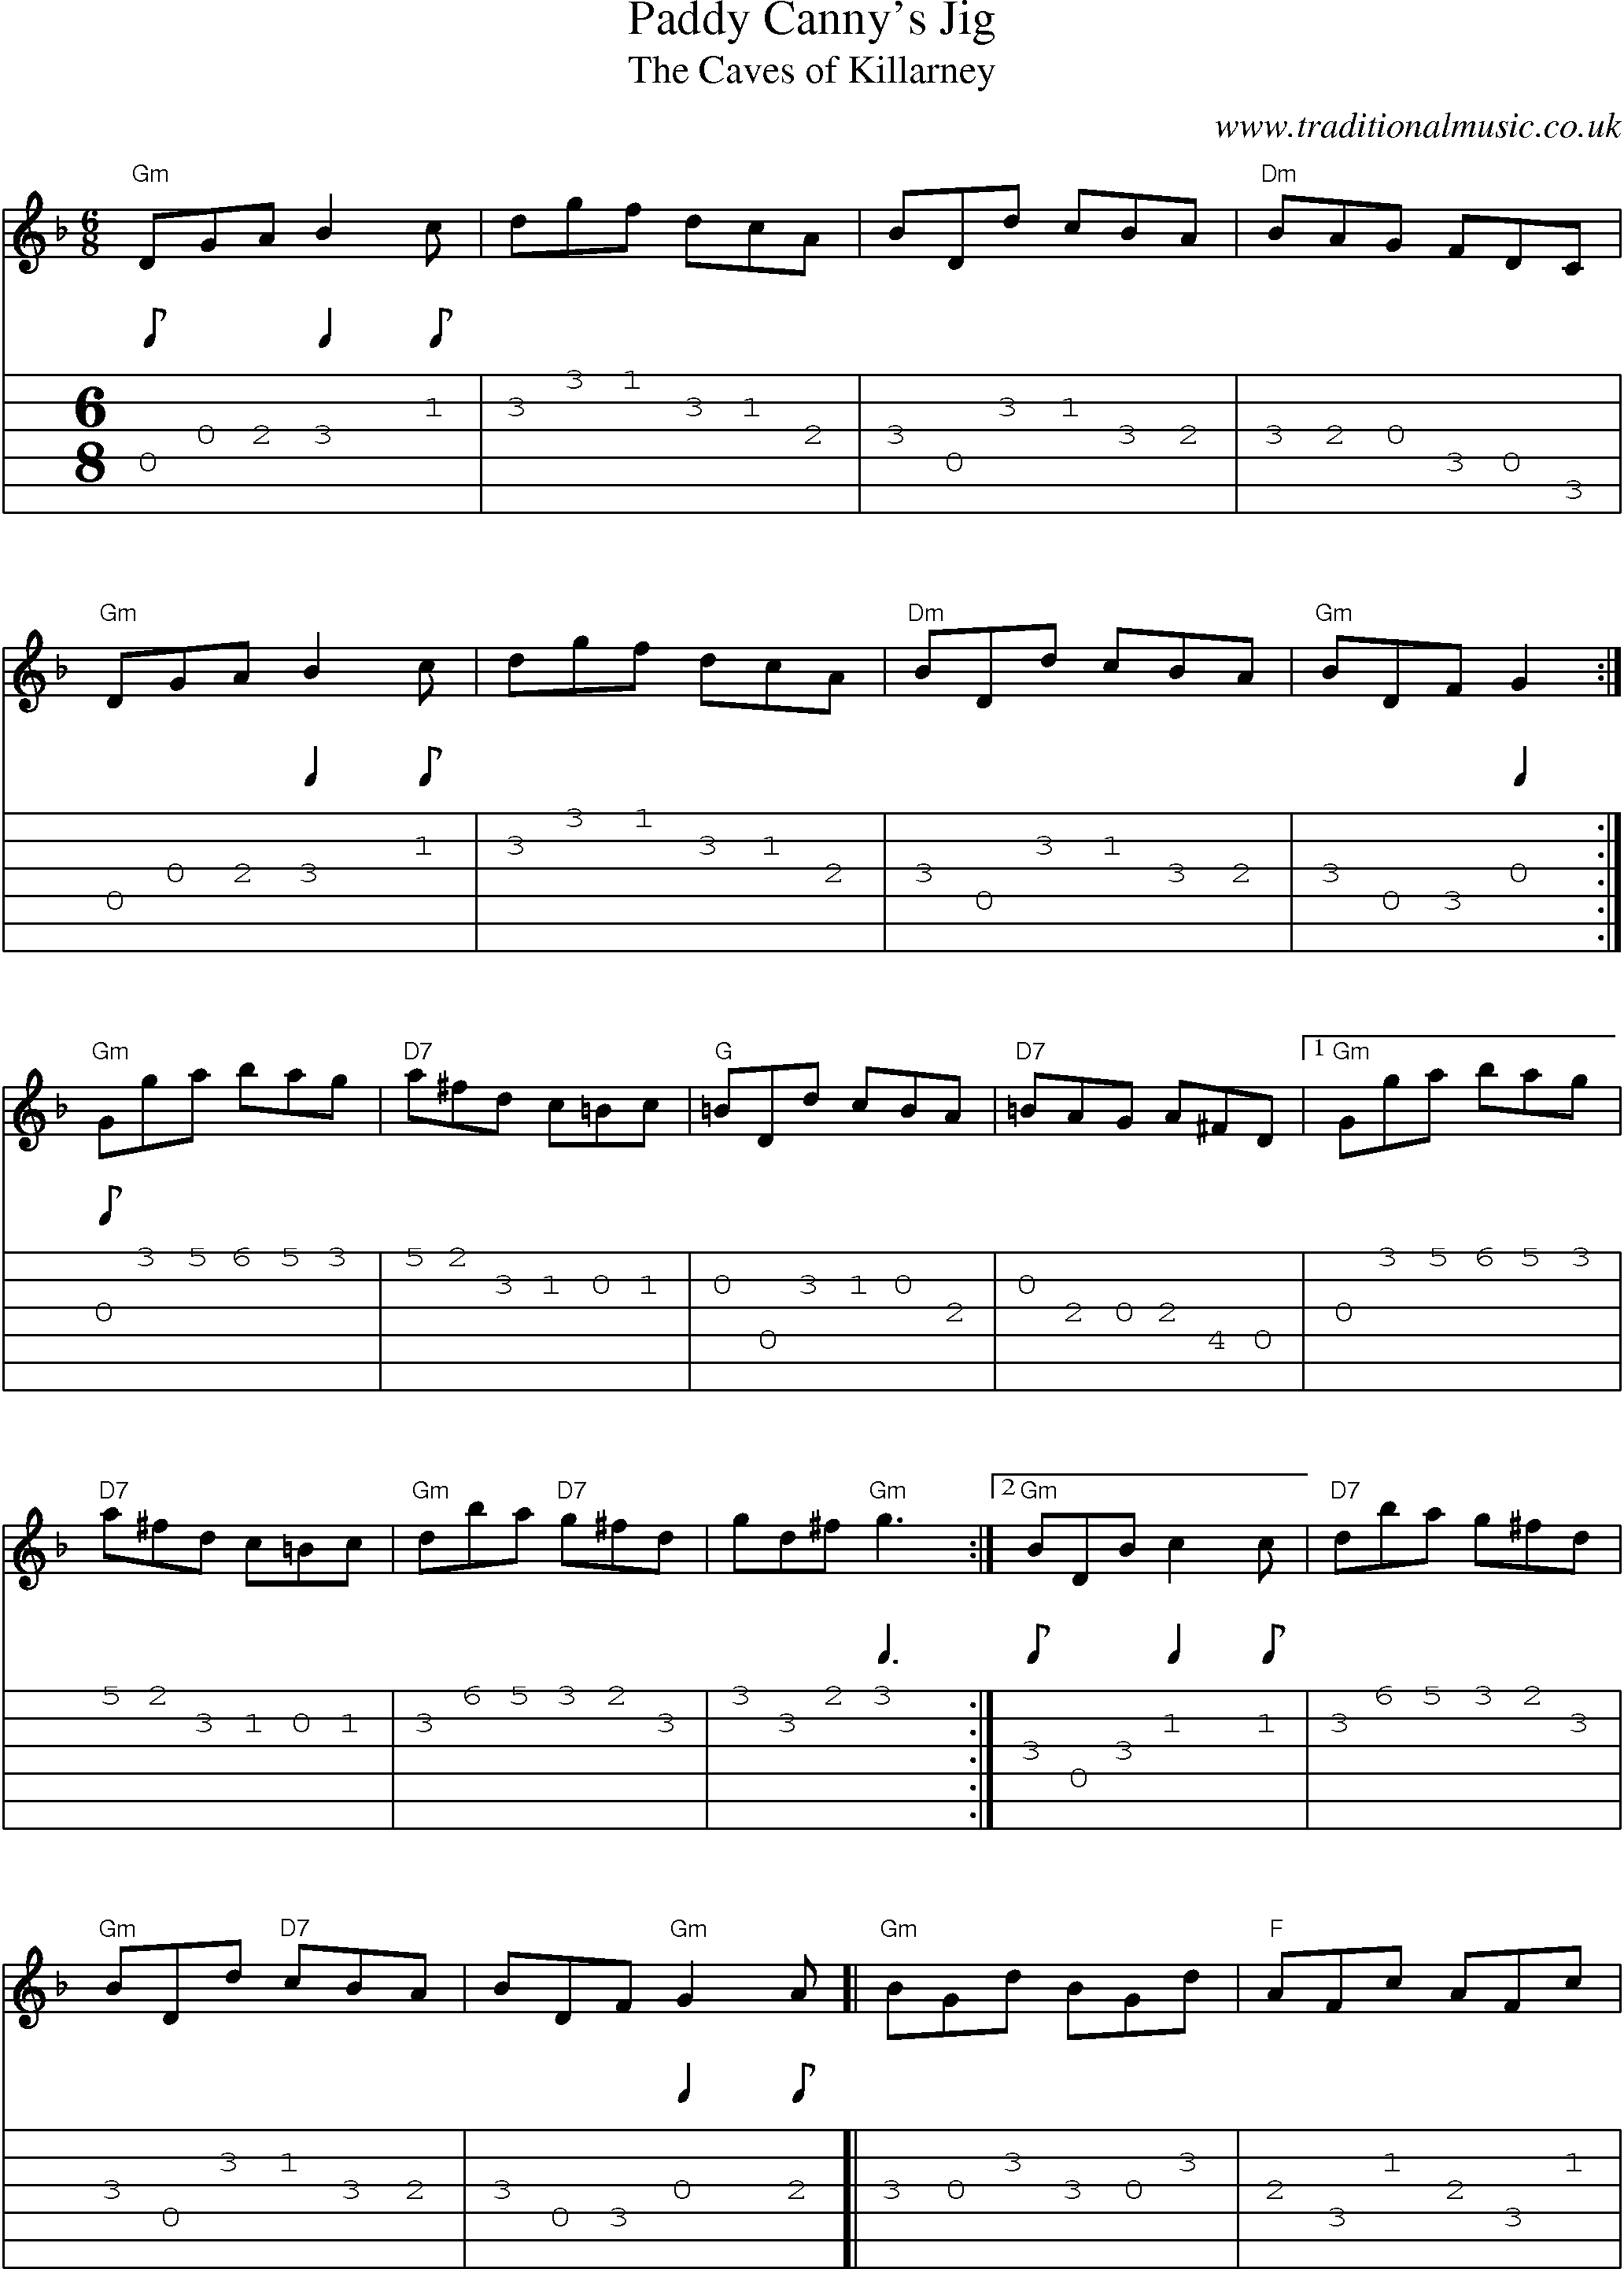 Music Score and Guitar Tabs for Paddy Cannys Jig